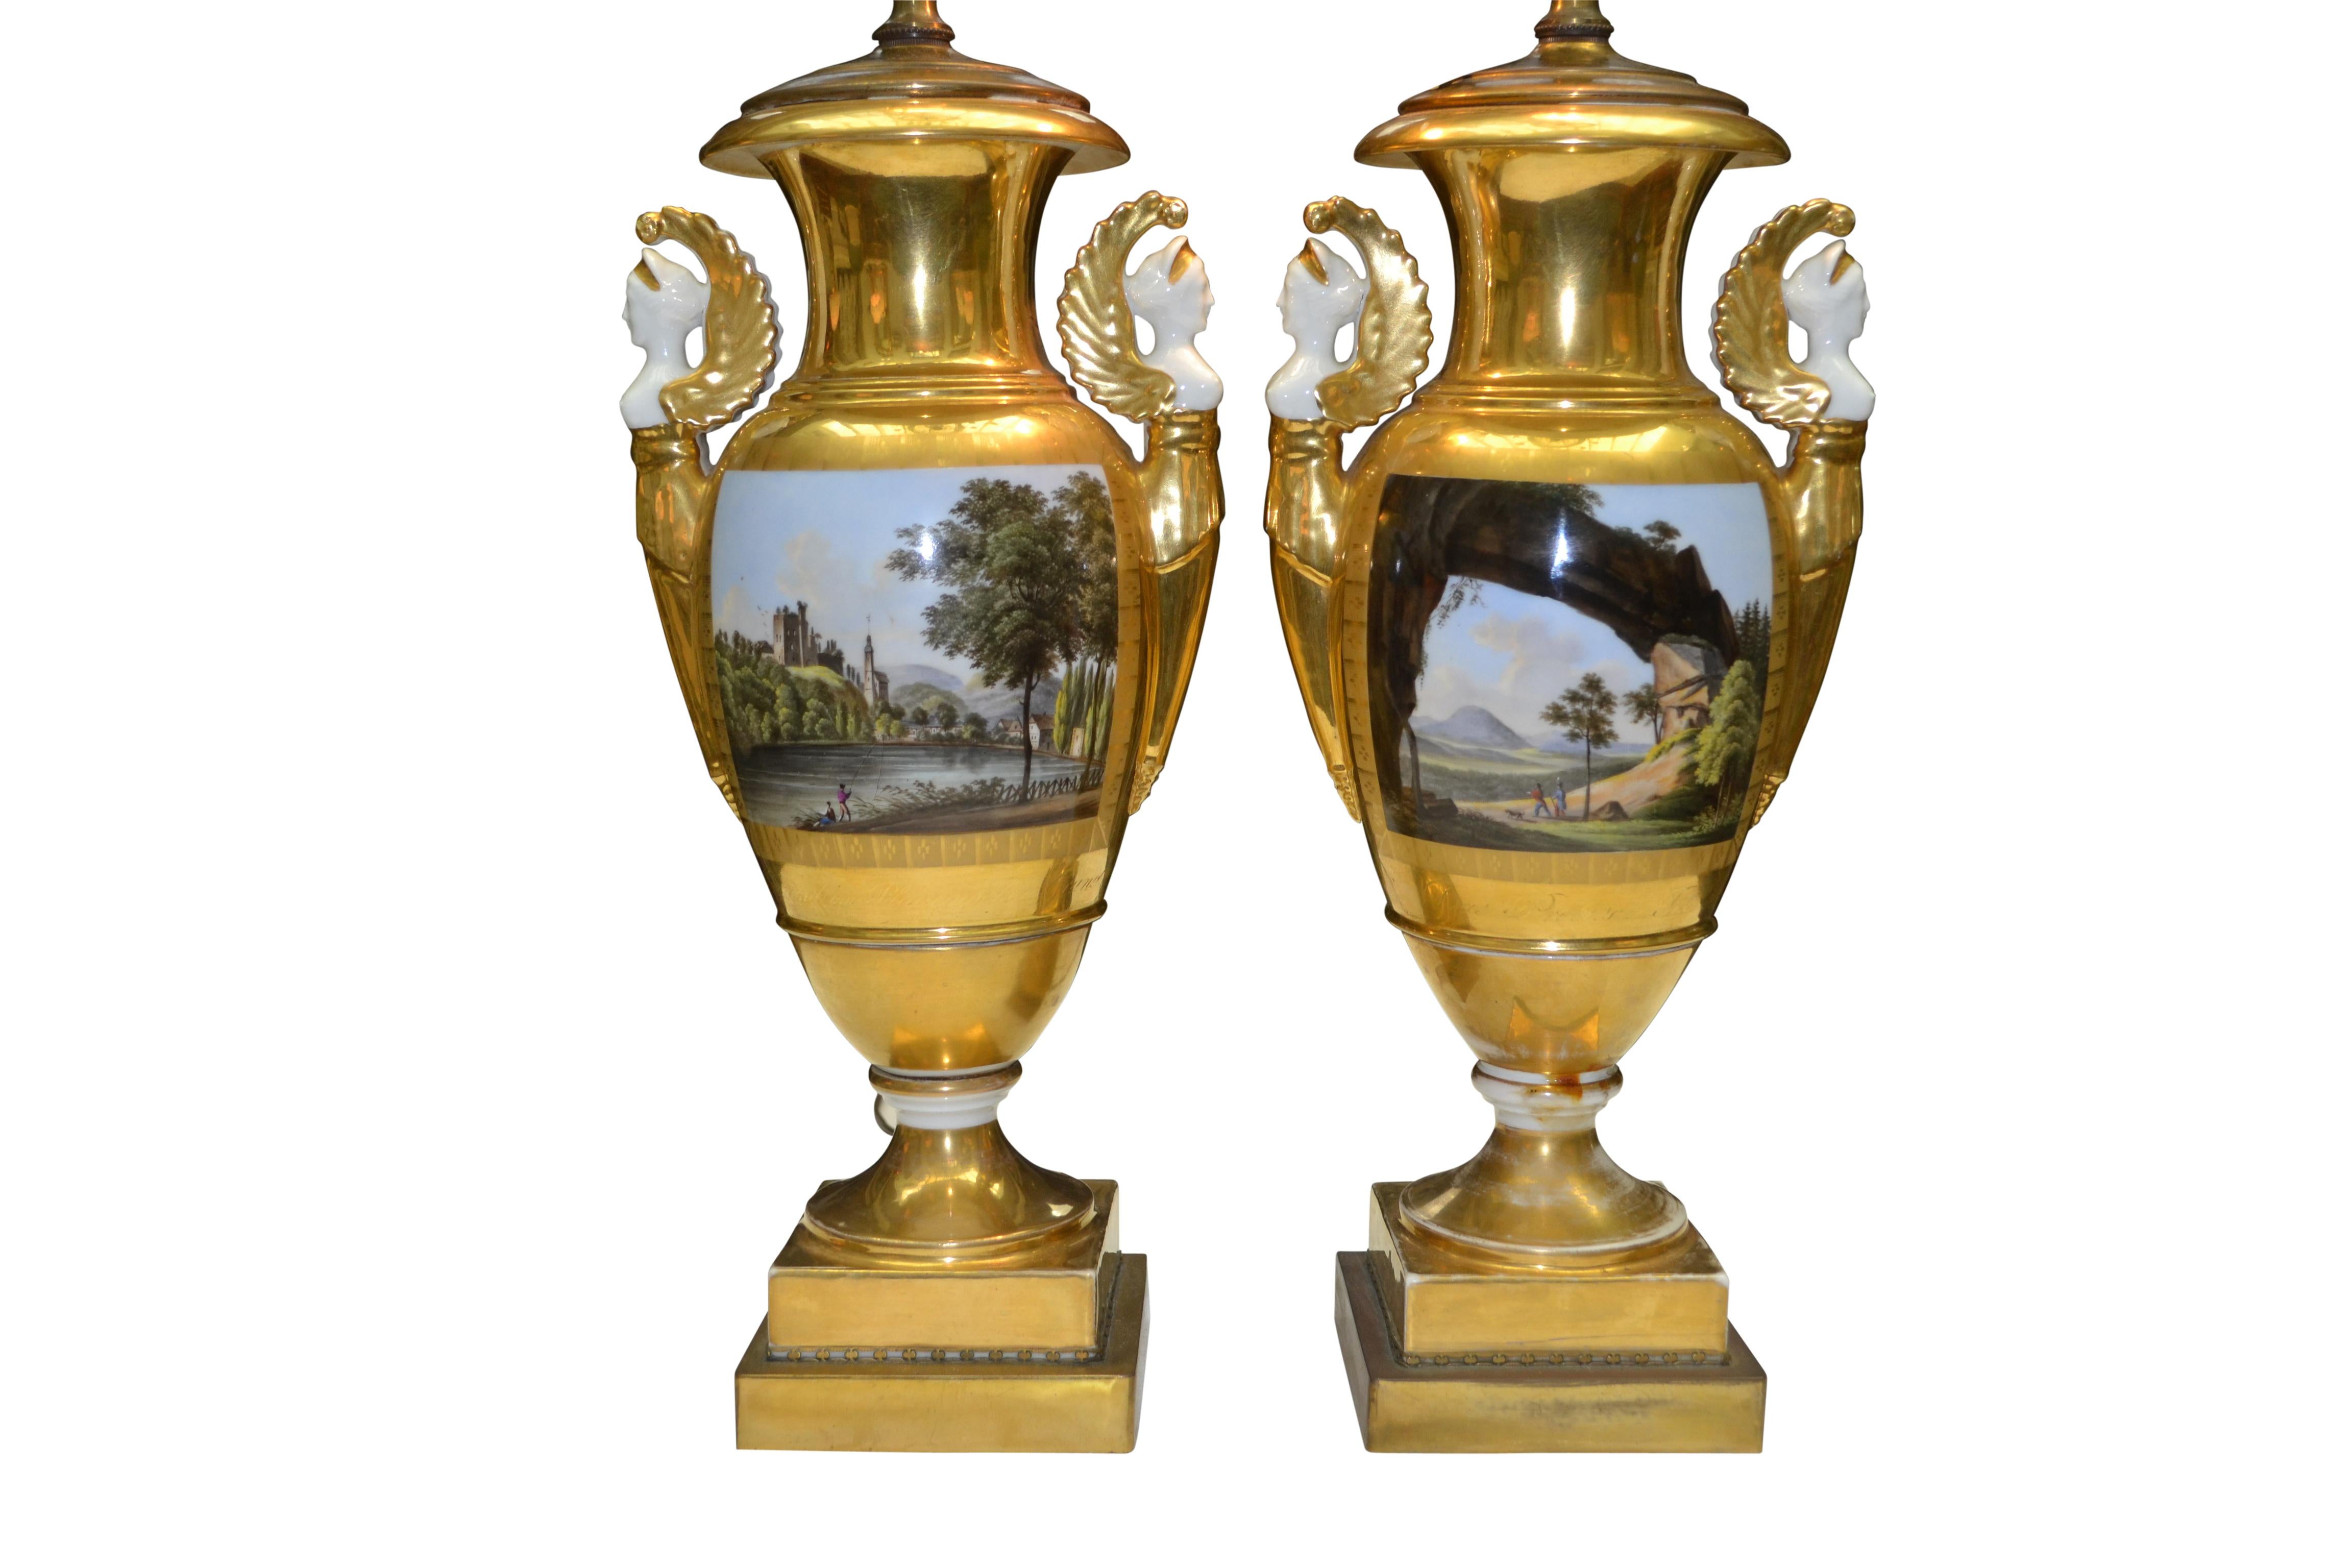 Empire Pair of 19th Century Painted and Gilded Saxon Porcelain Landscape Vase Lamps